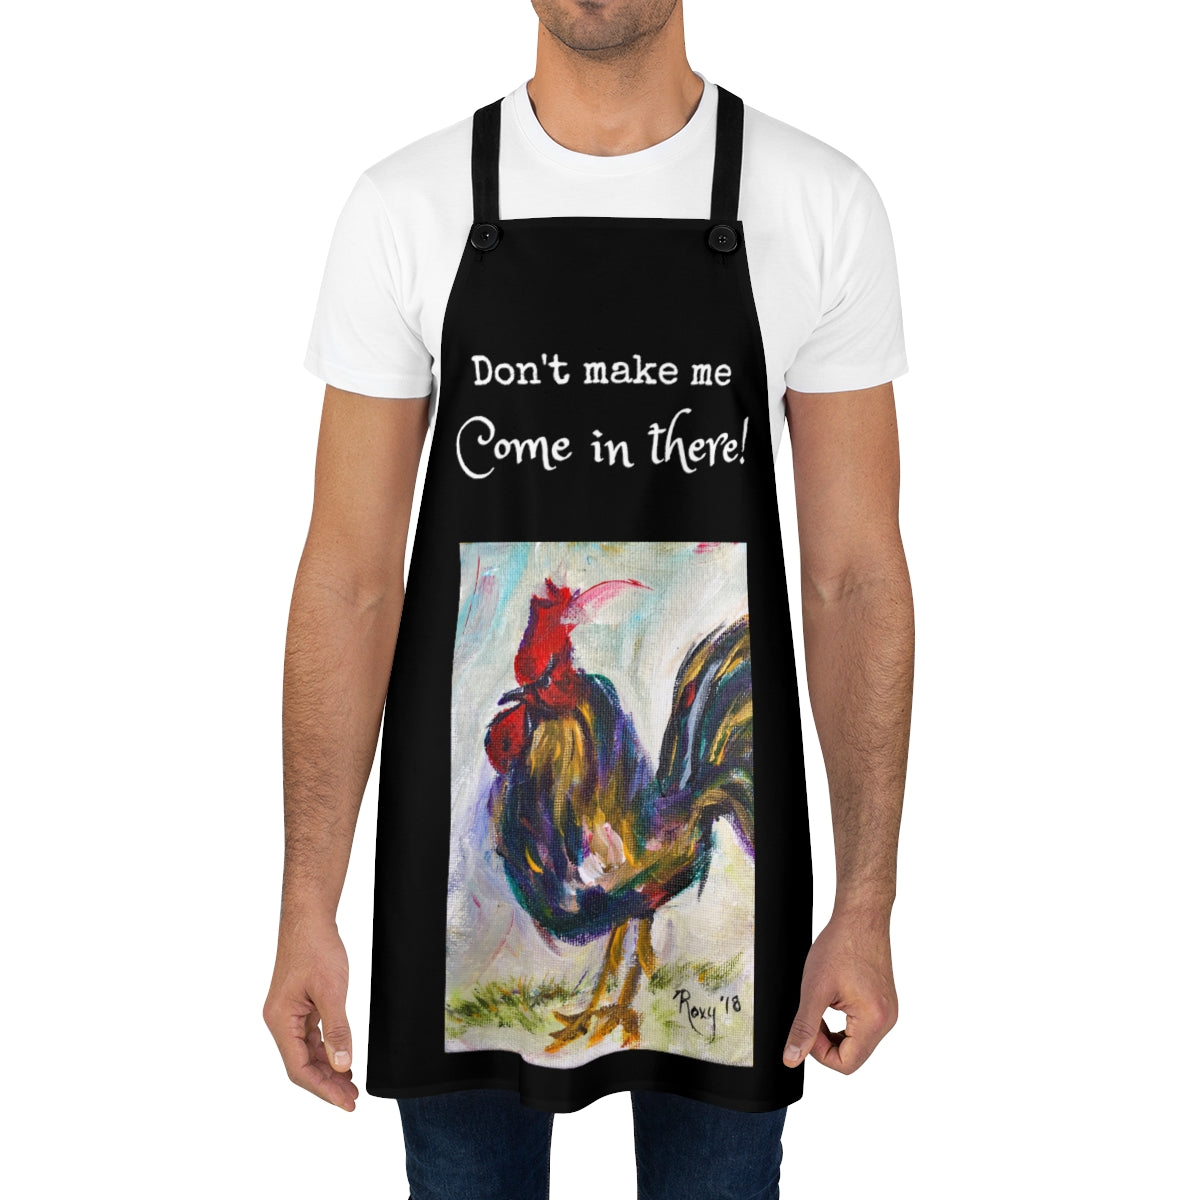 Don't make me come in there!  Chef  Black Kitchen Apron  with Original  funny Rooster